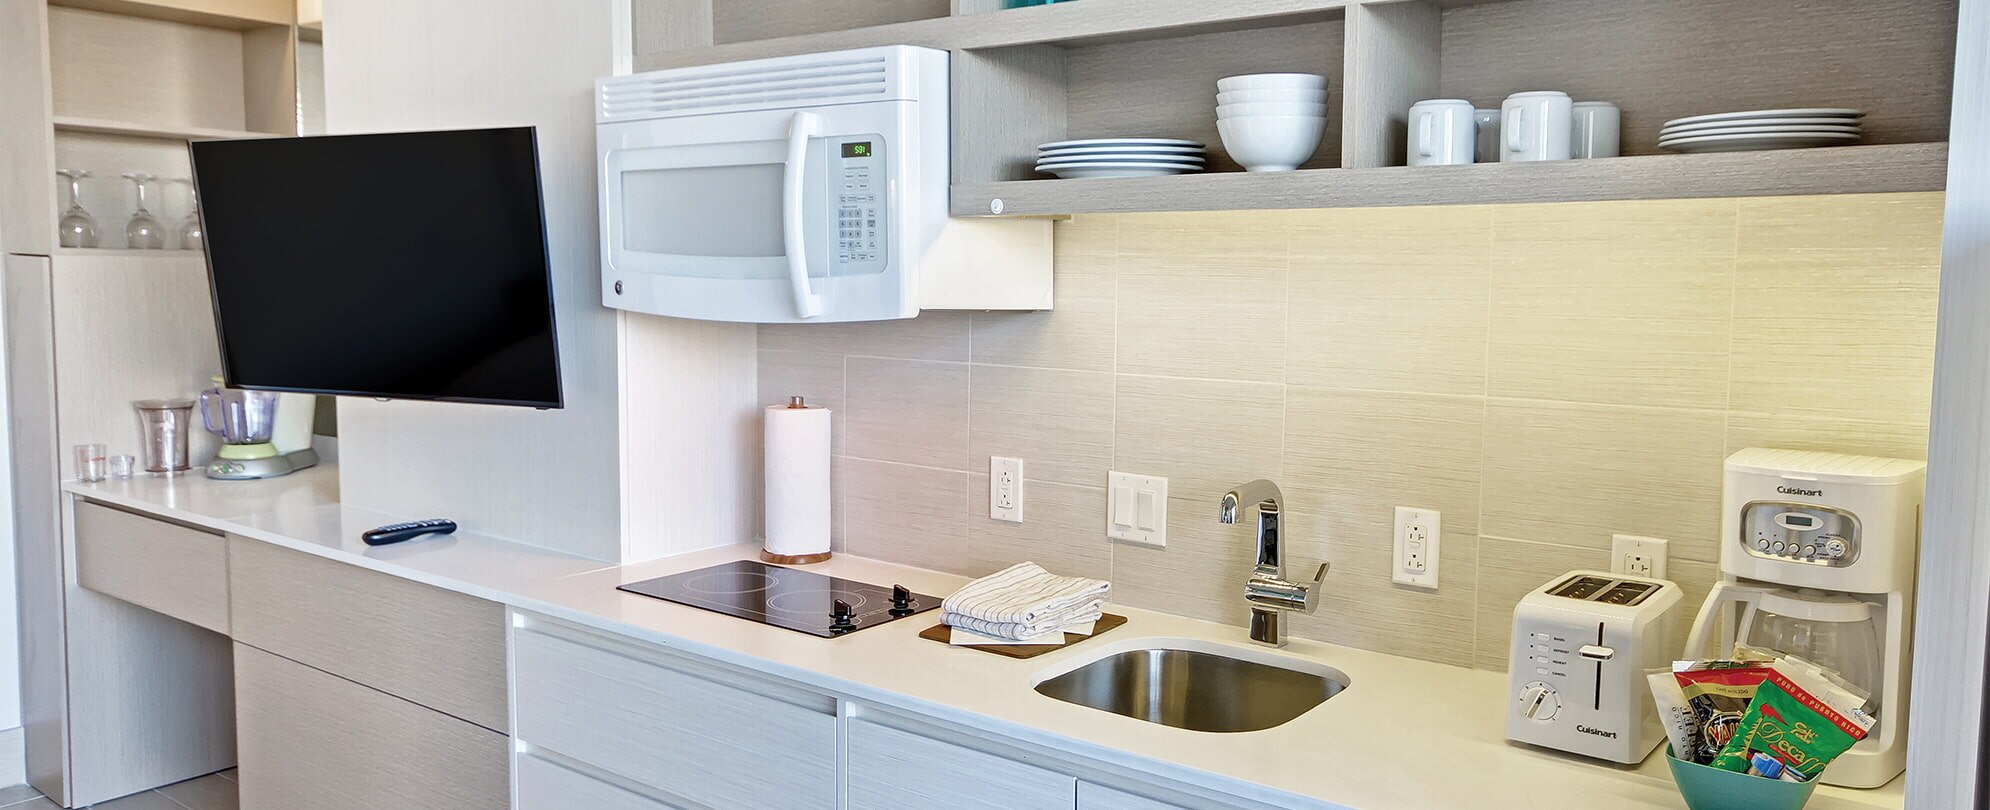 TV, microwave, sink, toaster, and coffee maker in a studio suite at Margaritaville Vacation Club by Wyndham - Rio Mar.